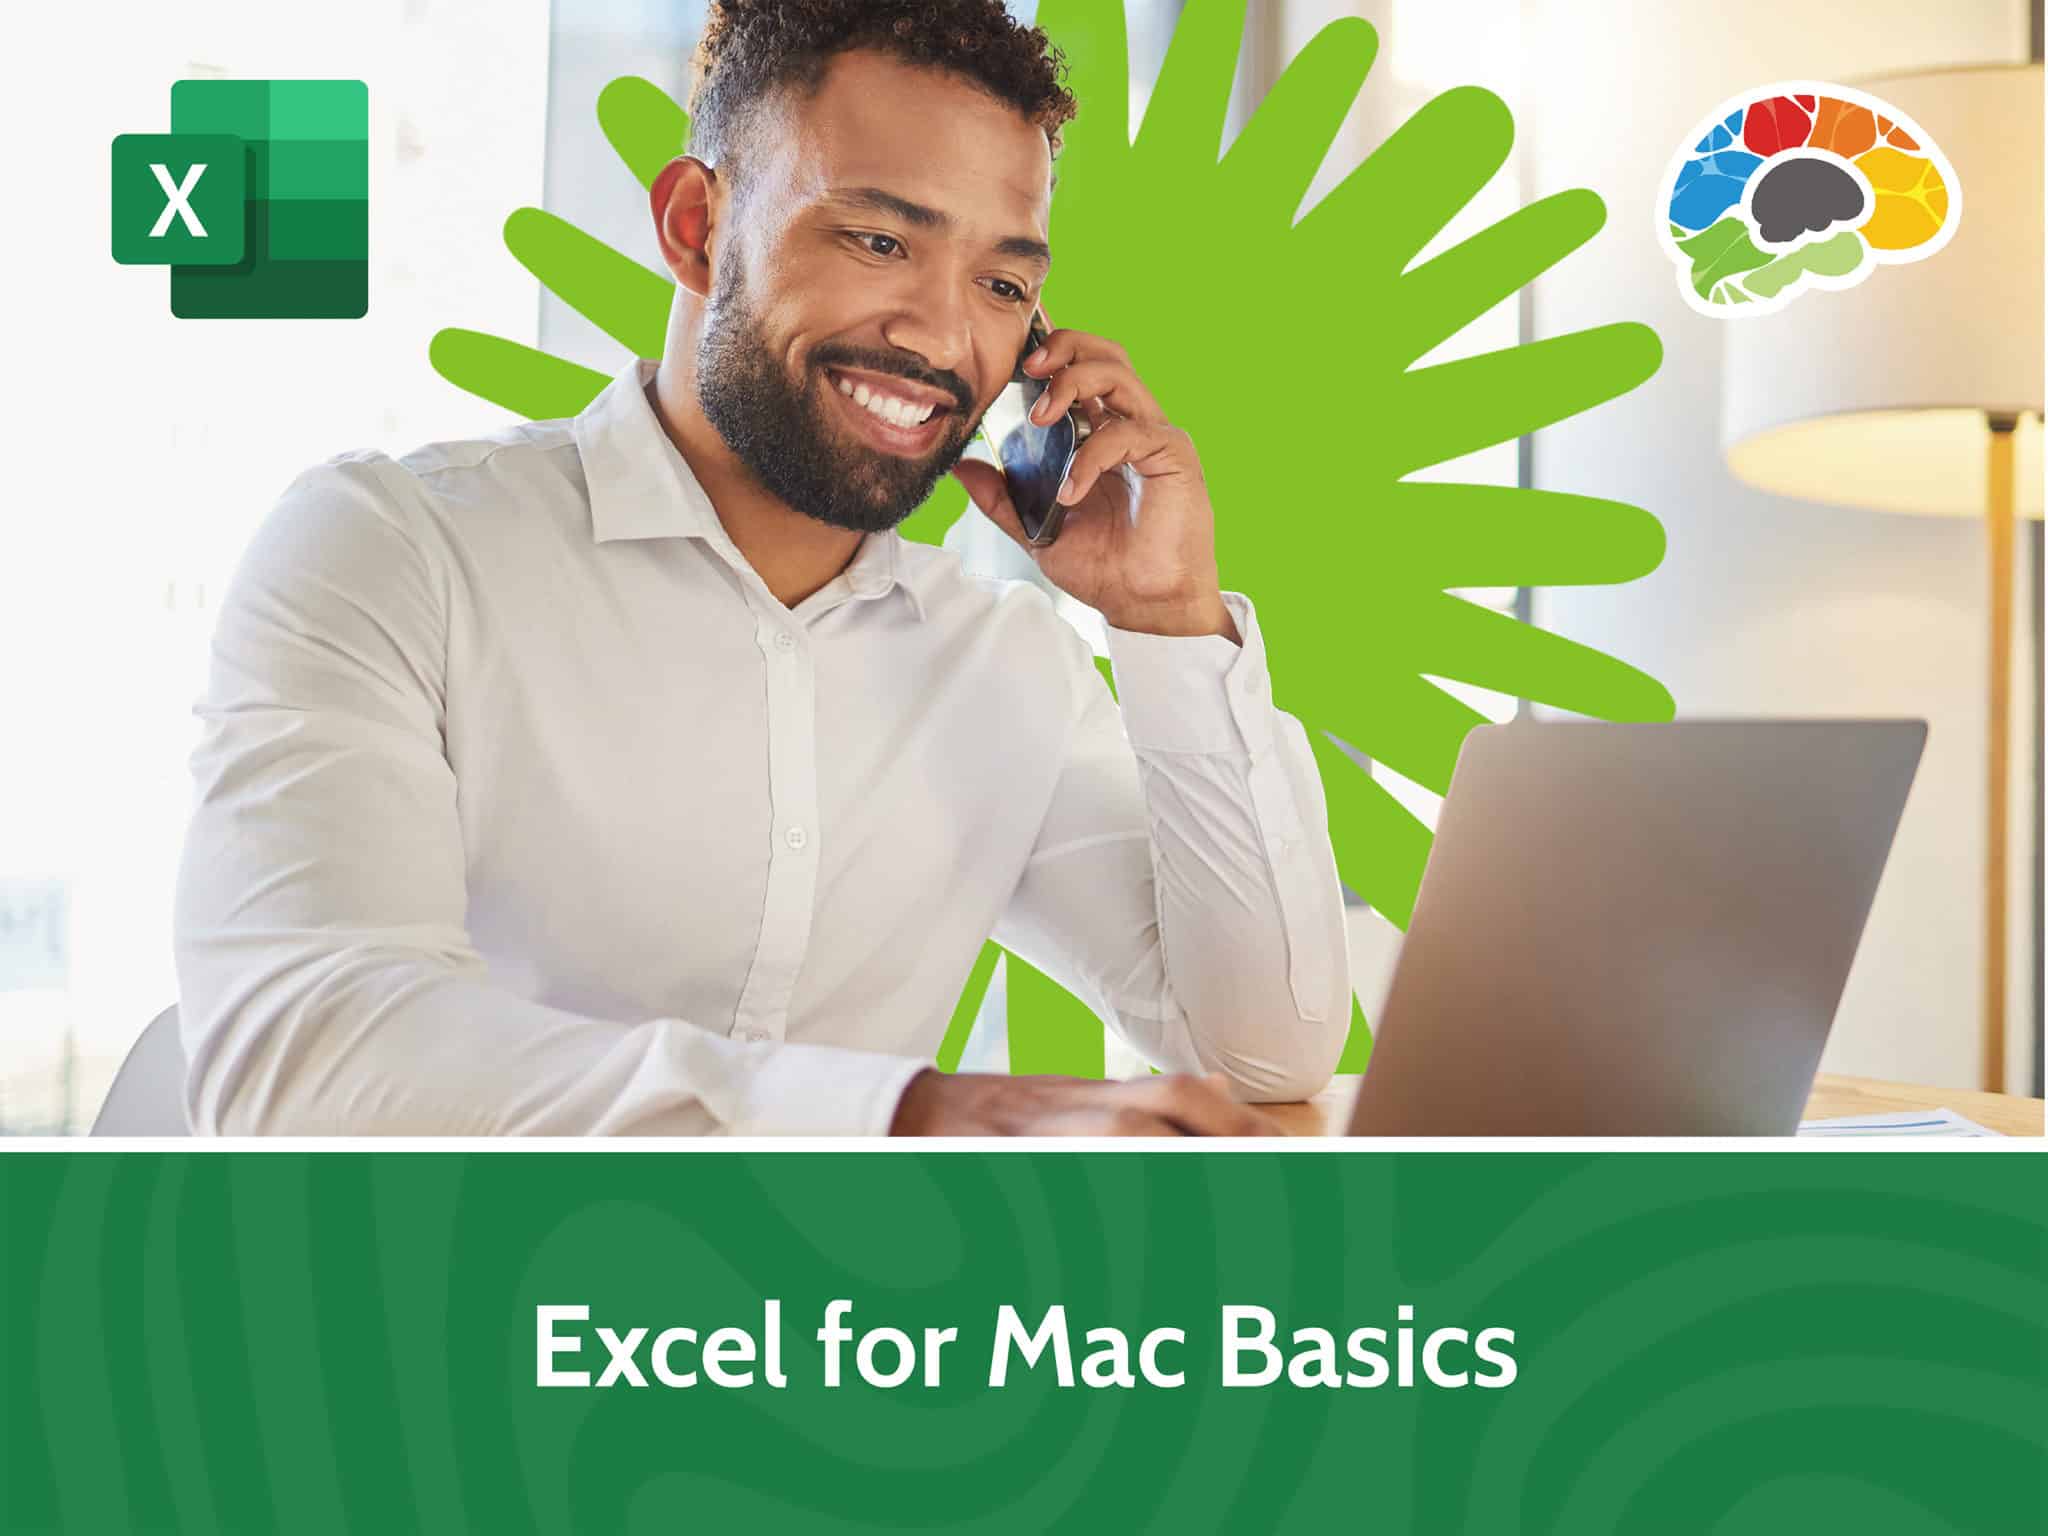 Excel for Mac Basics scaled